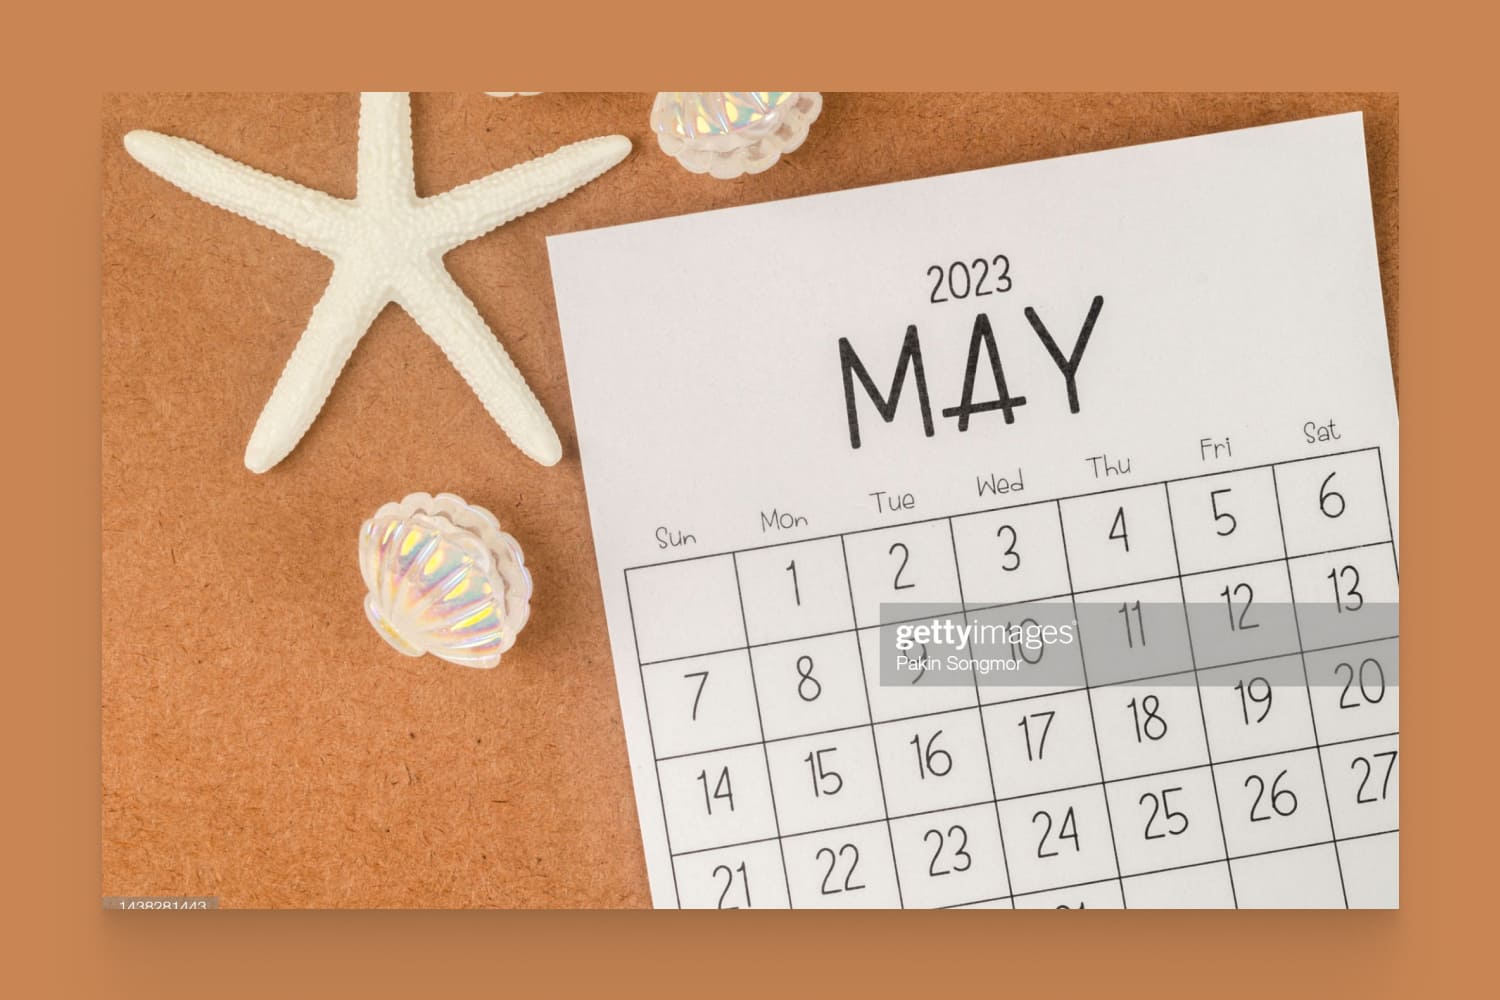 Calendar for May 2023 with a starfish and shellfish against a brown paper background